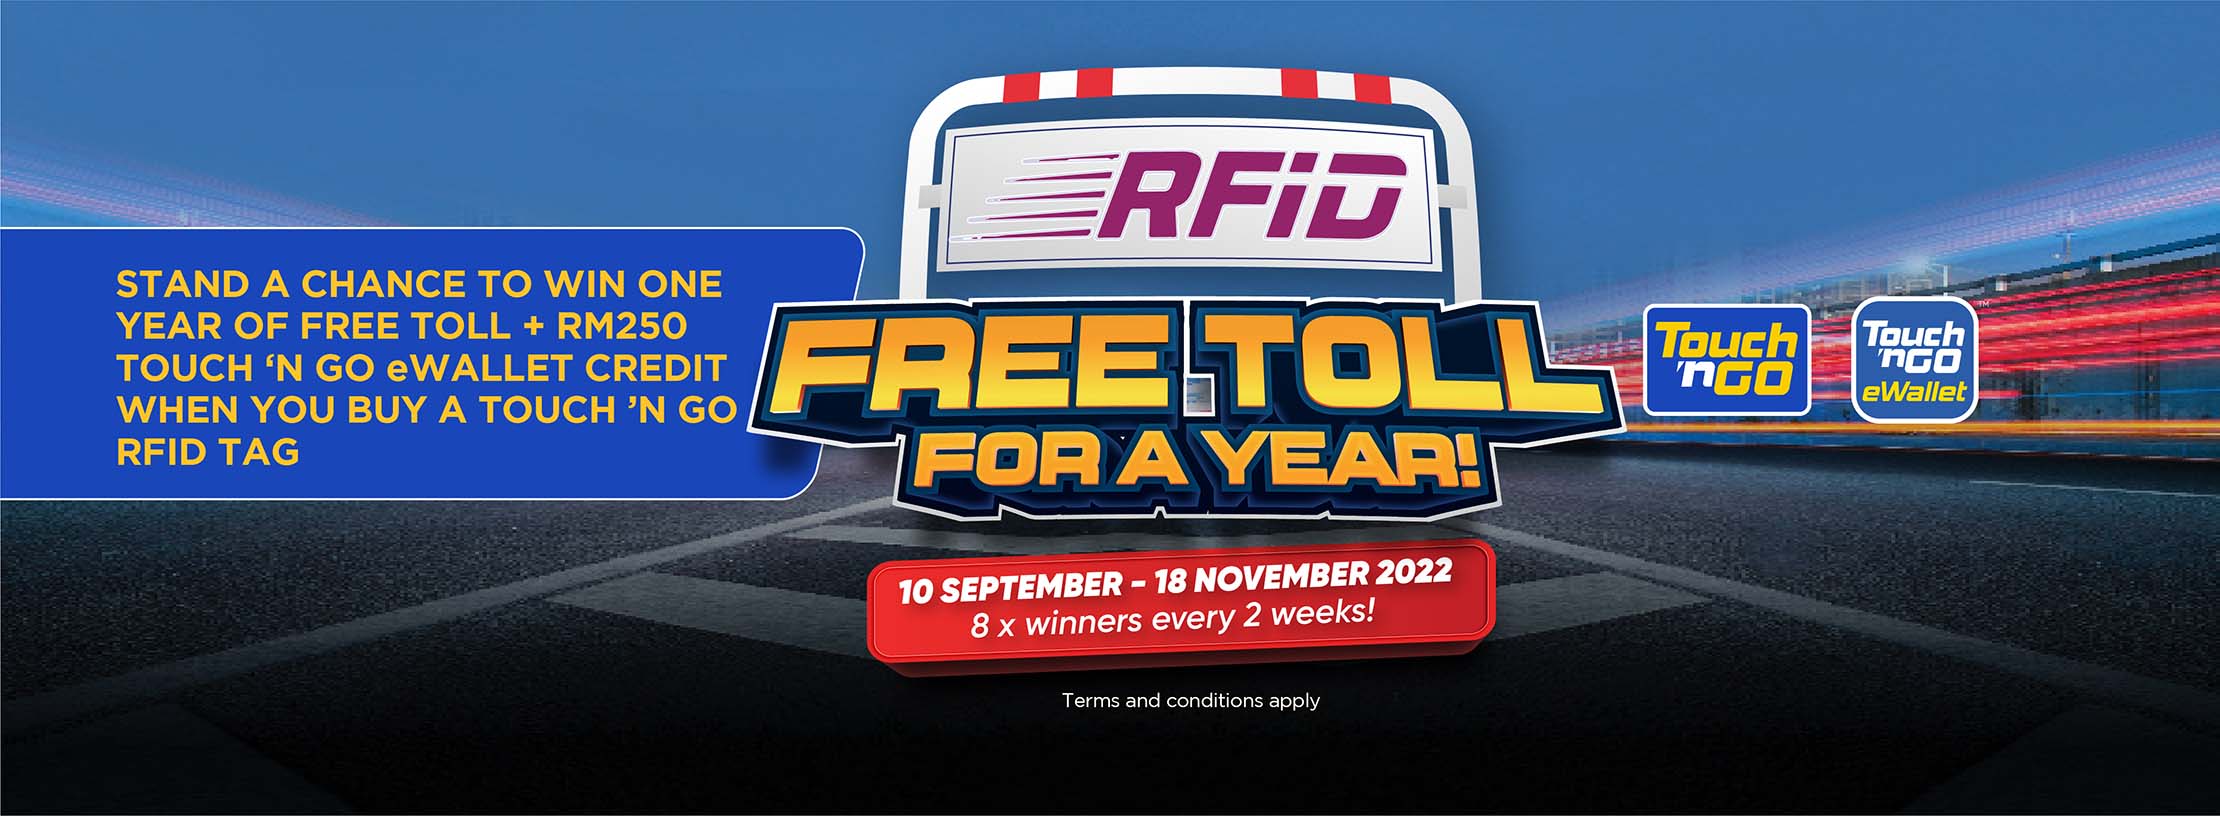 [Use-this]-FAOL-RFID-TOLL-FREE-WEBSITE-BANNER-02.jpg